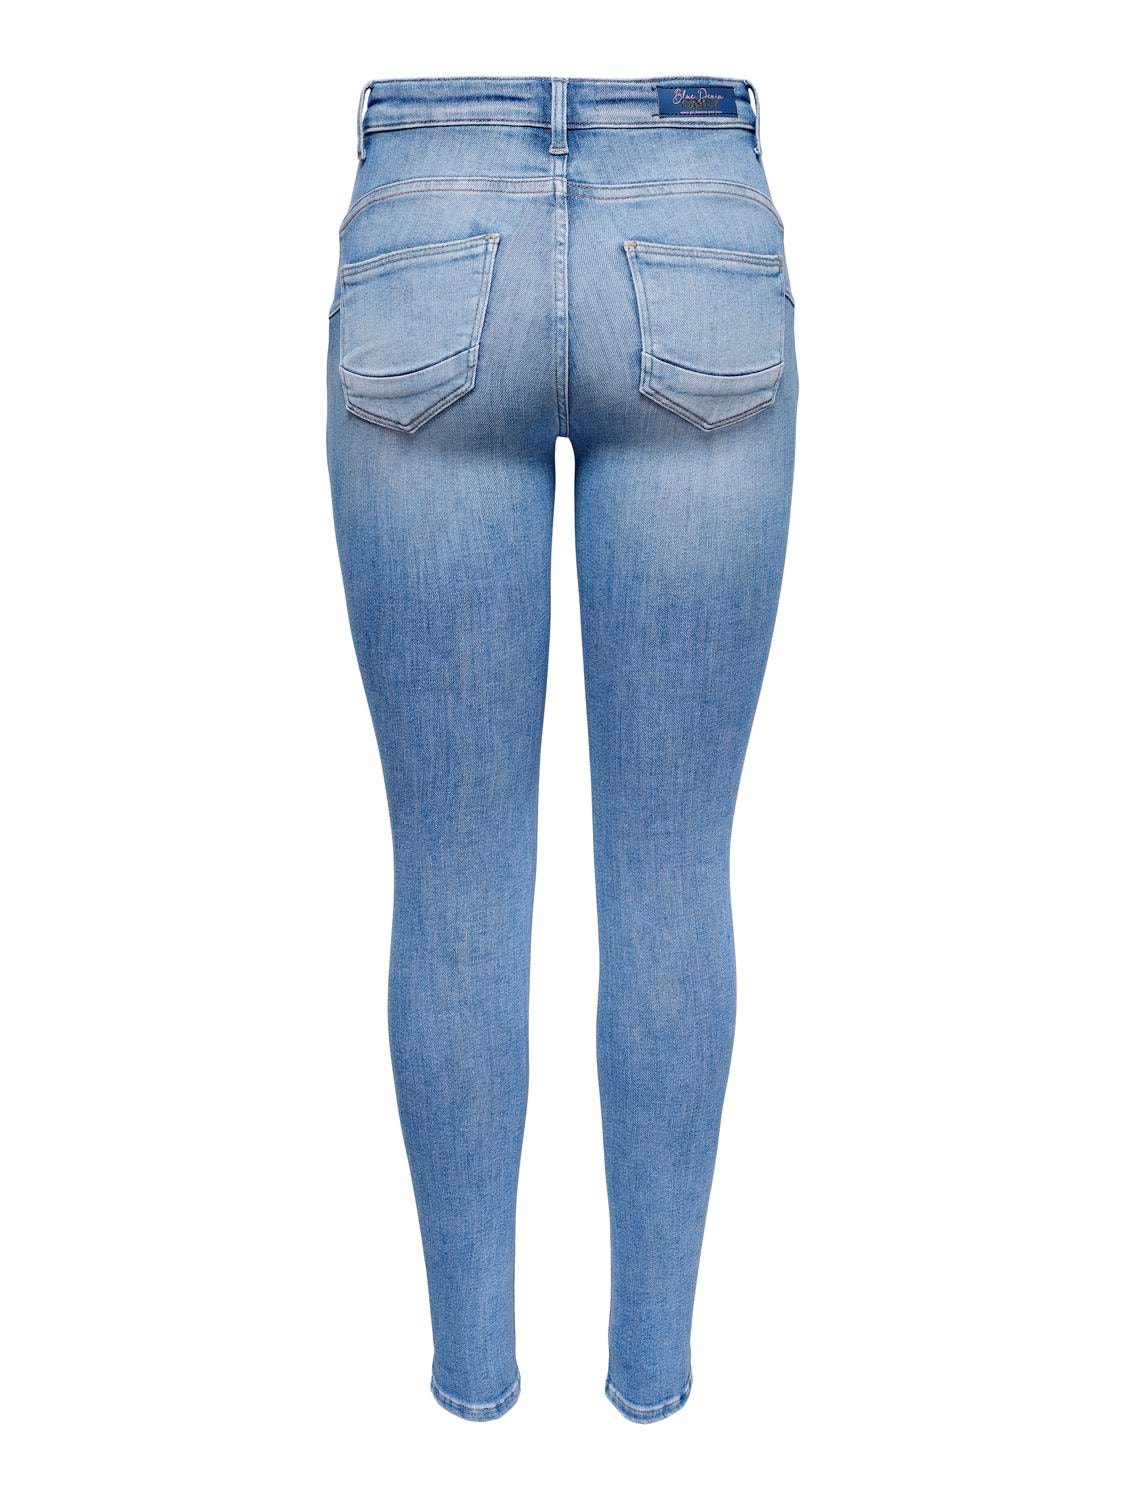 ONLY Skinny Fit Mid waist Jeans -Special Bright Blue Denim - 15250273